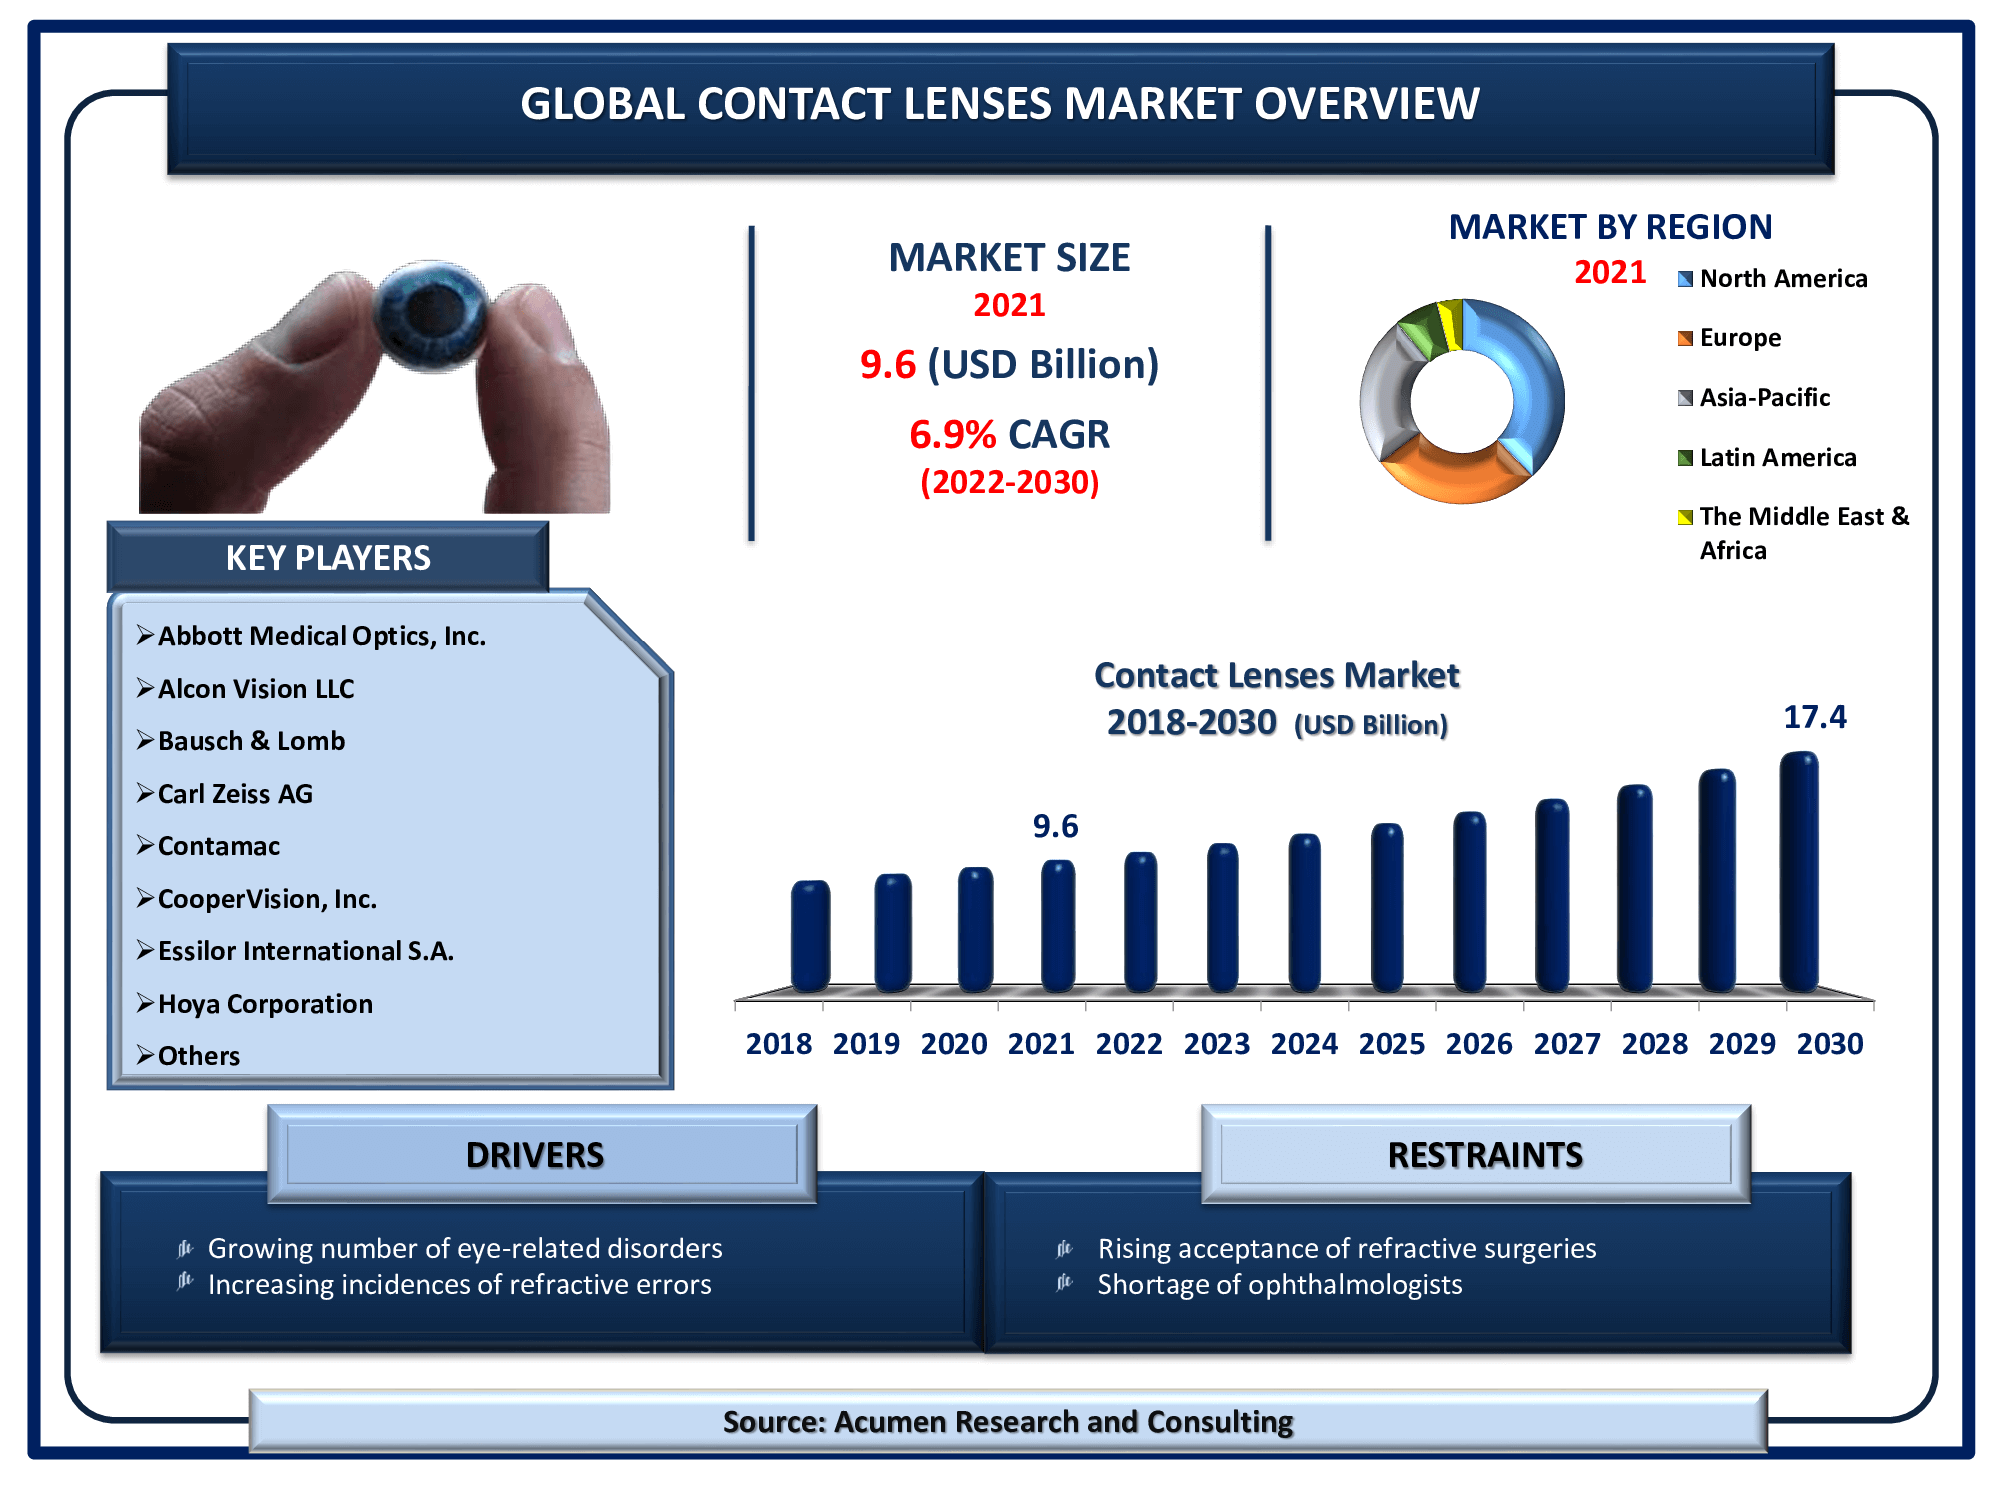 Global Contact Lenses Market Revenue is poised to garner USD 17.4 Billion by 2030 with a CAGR of 6.9% from 2022 to 2030